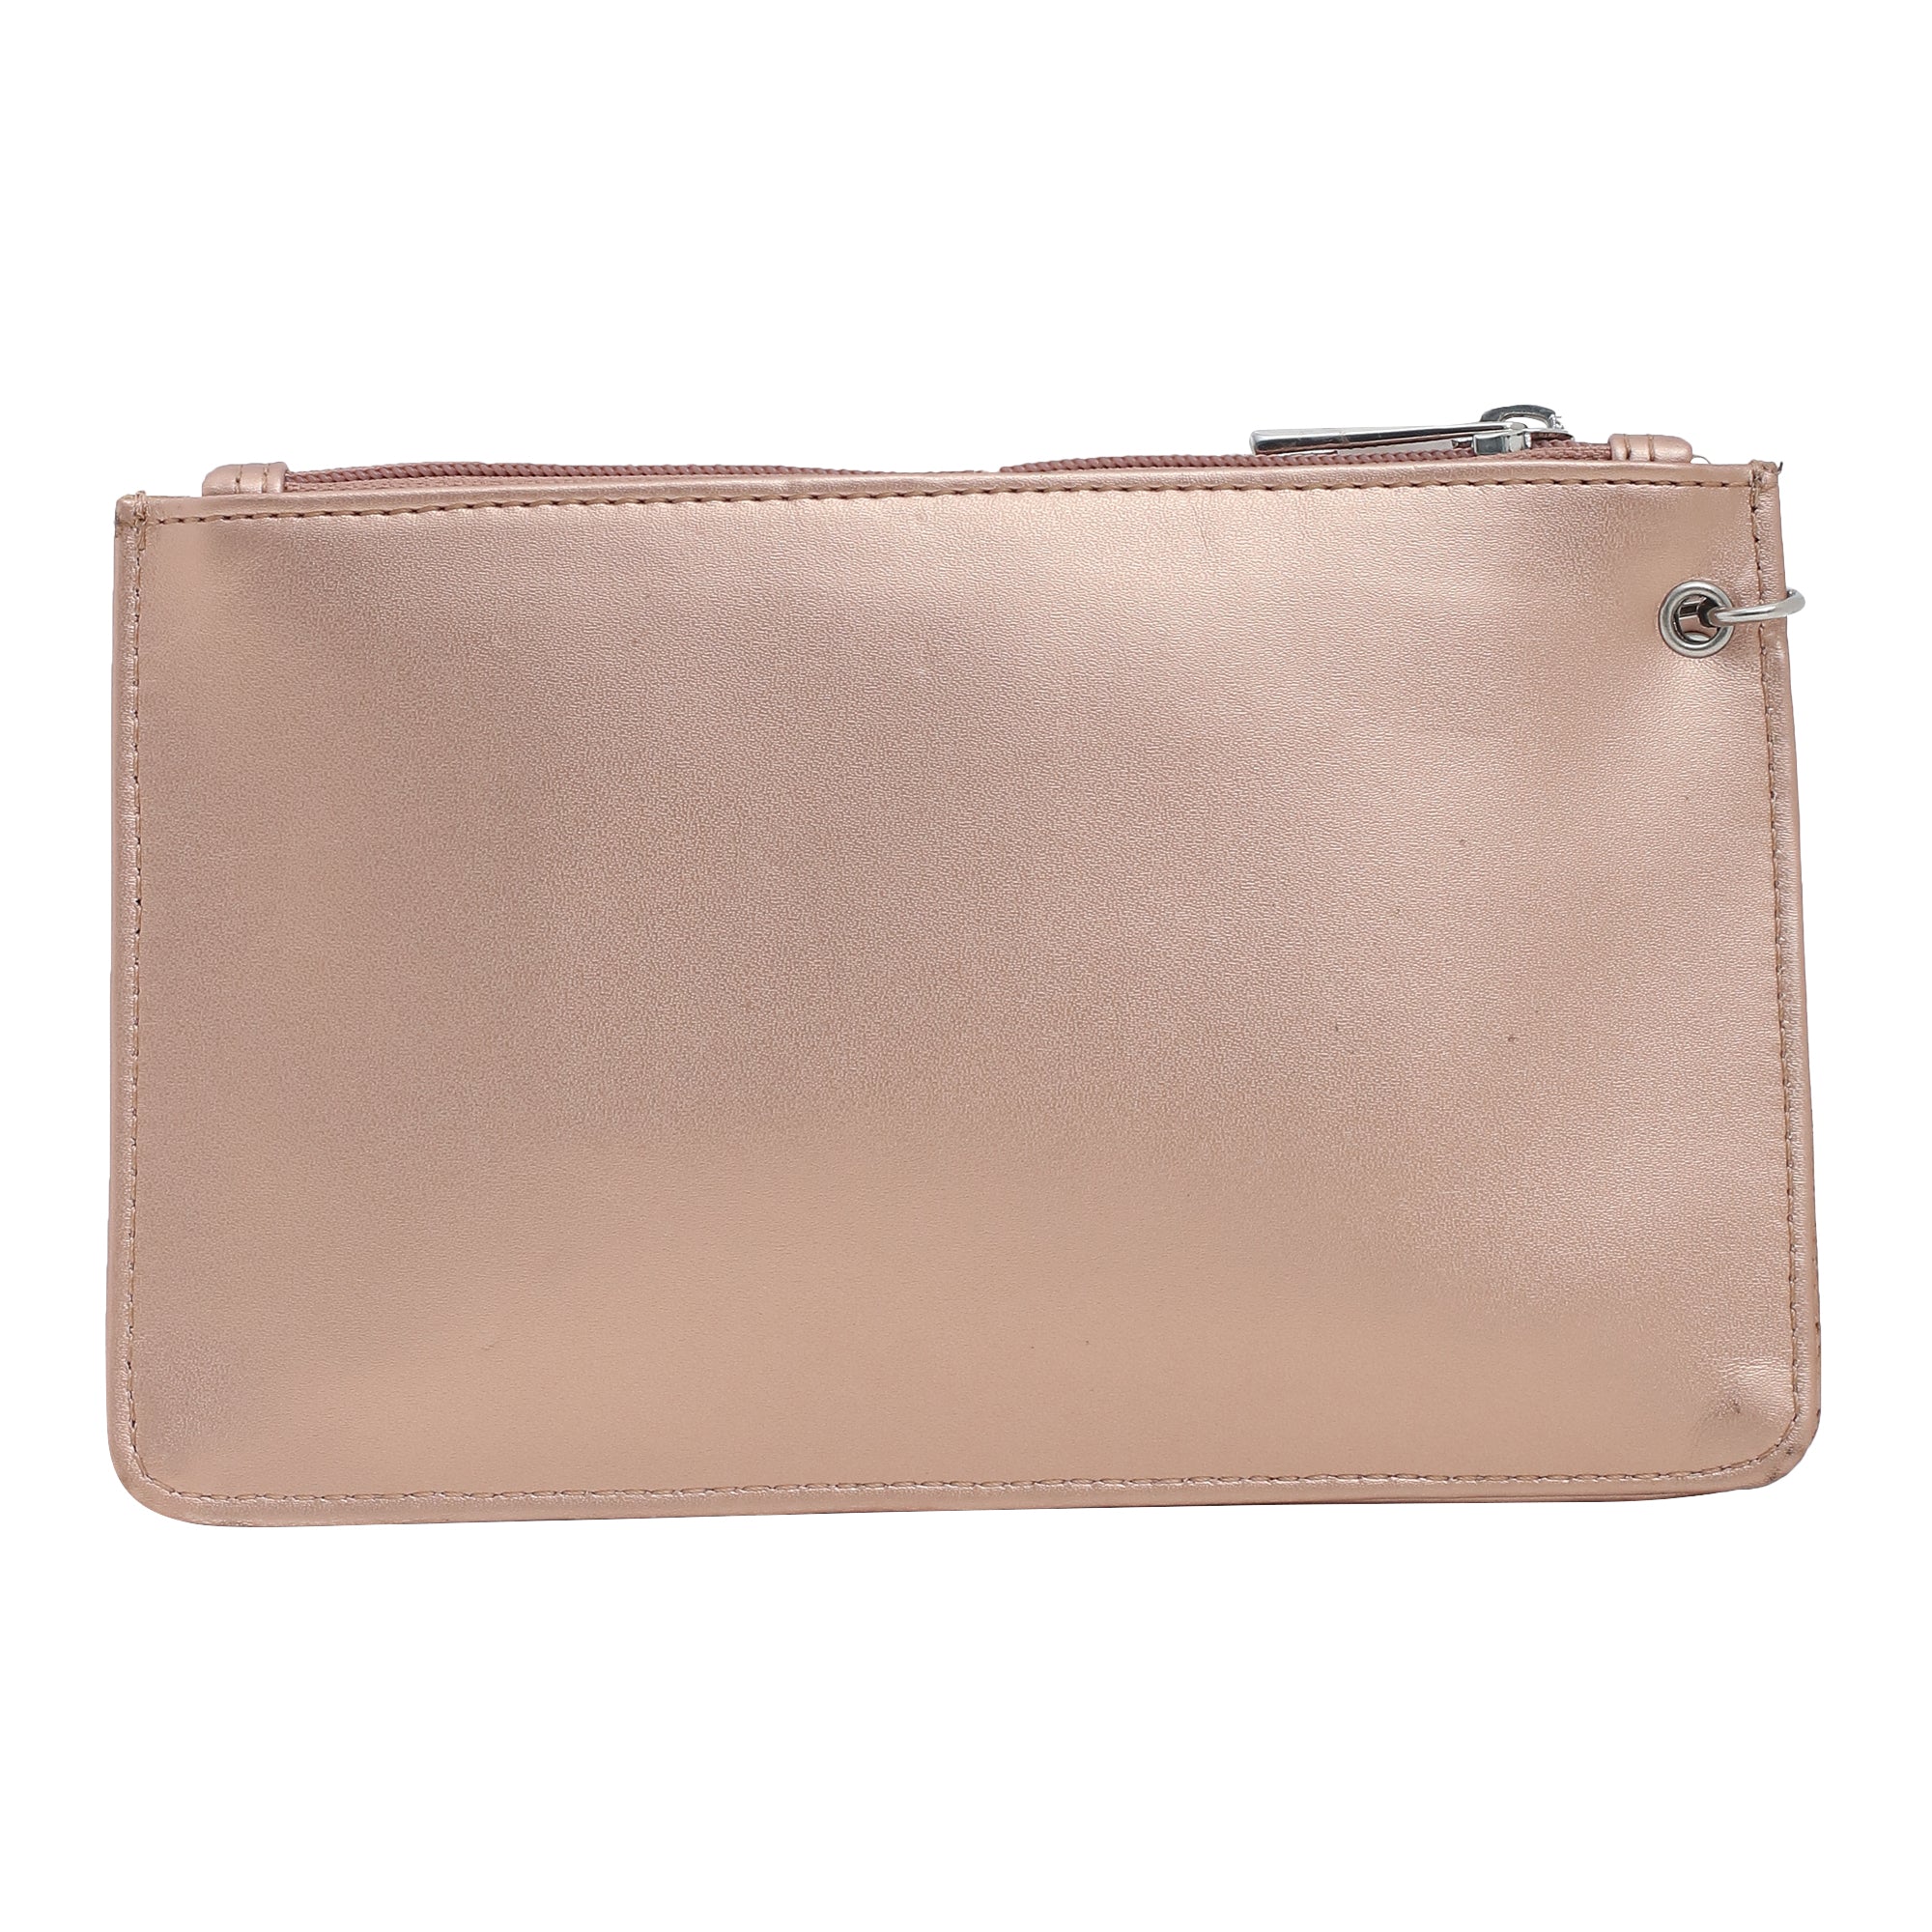 New Beige Taupe Calvin Klein Clutch Purse Wallet Bag India | Ubuy